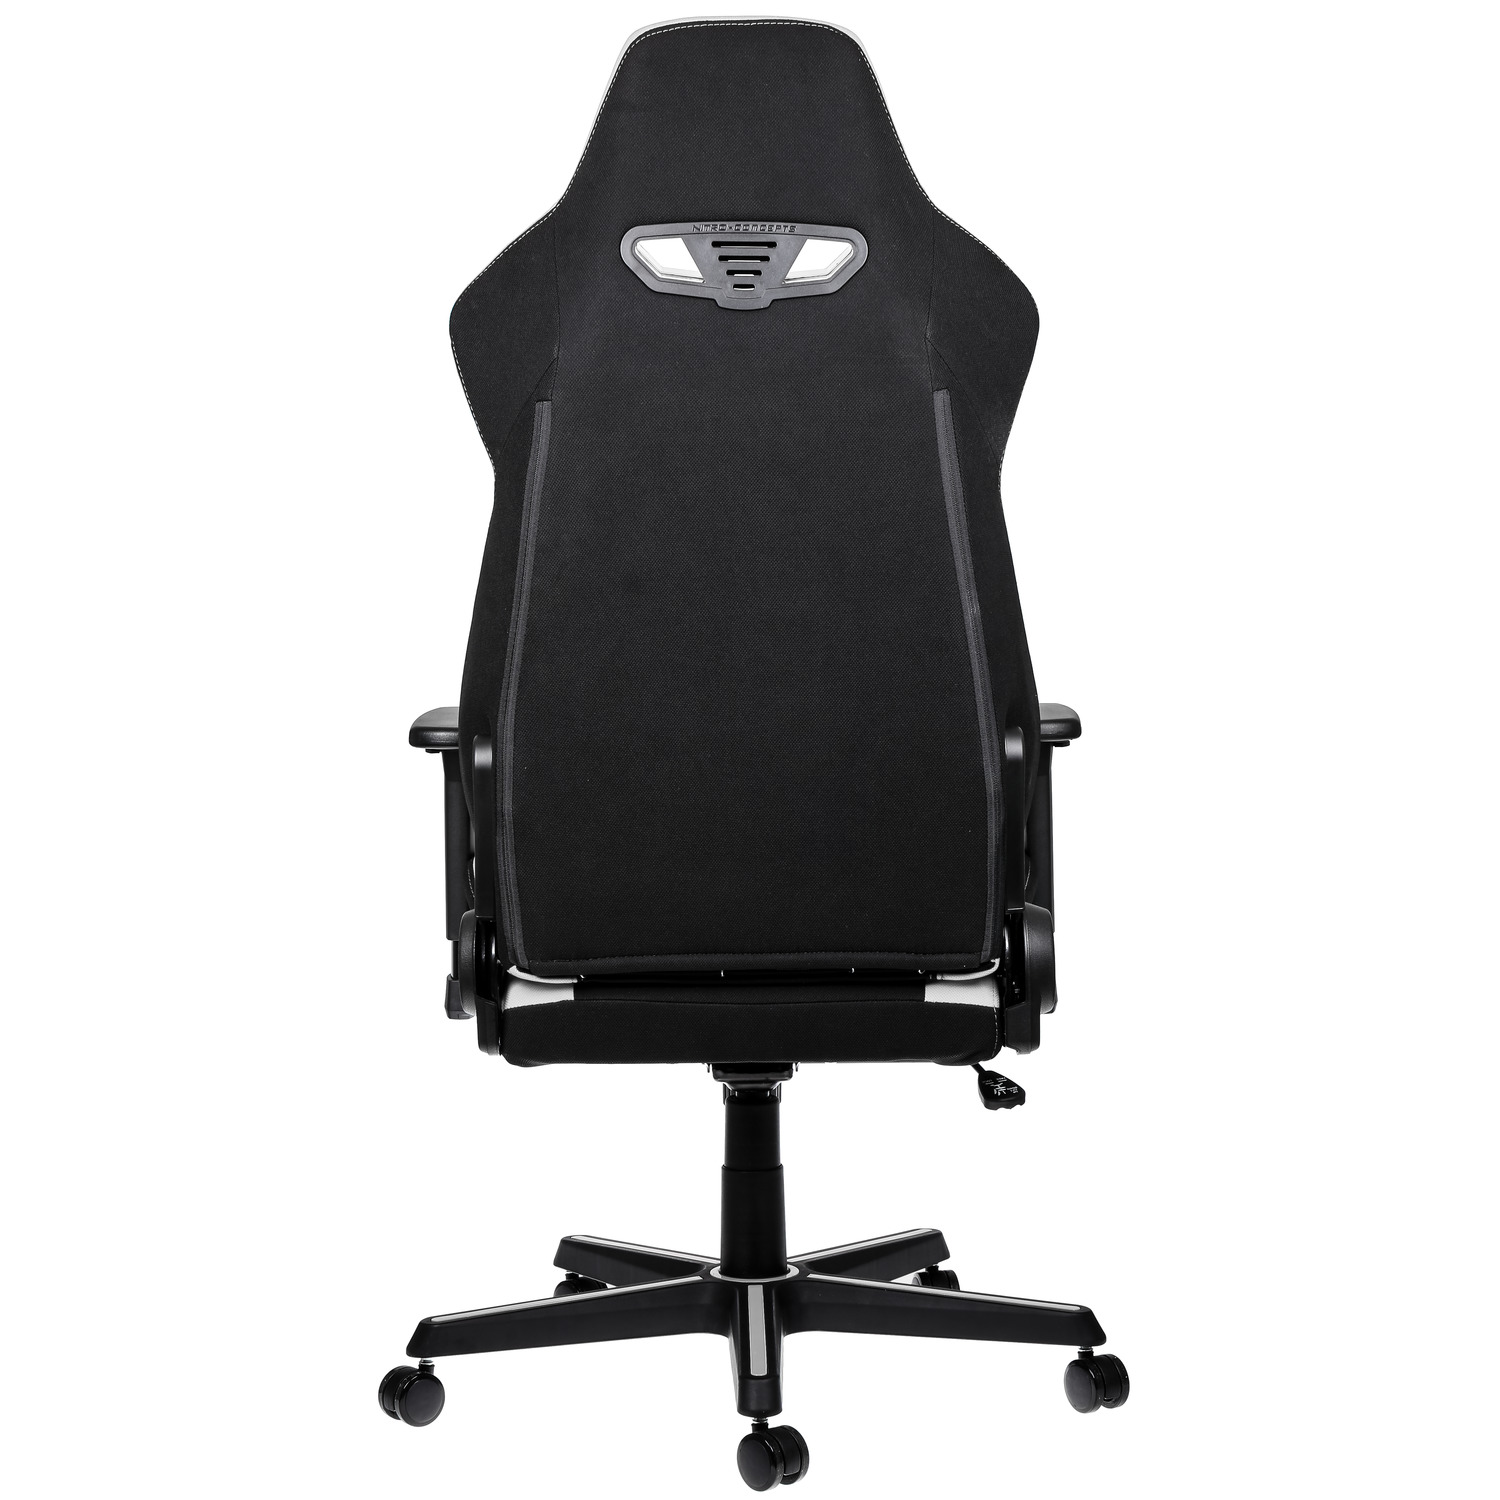 nitro-concepts - S300 Gaming Chair Radiant White